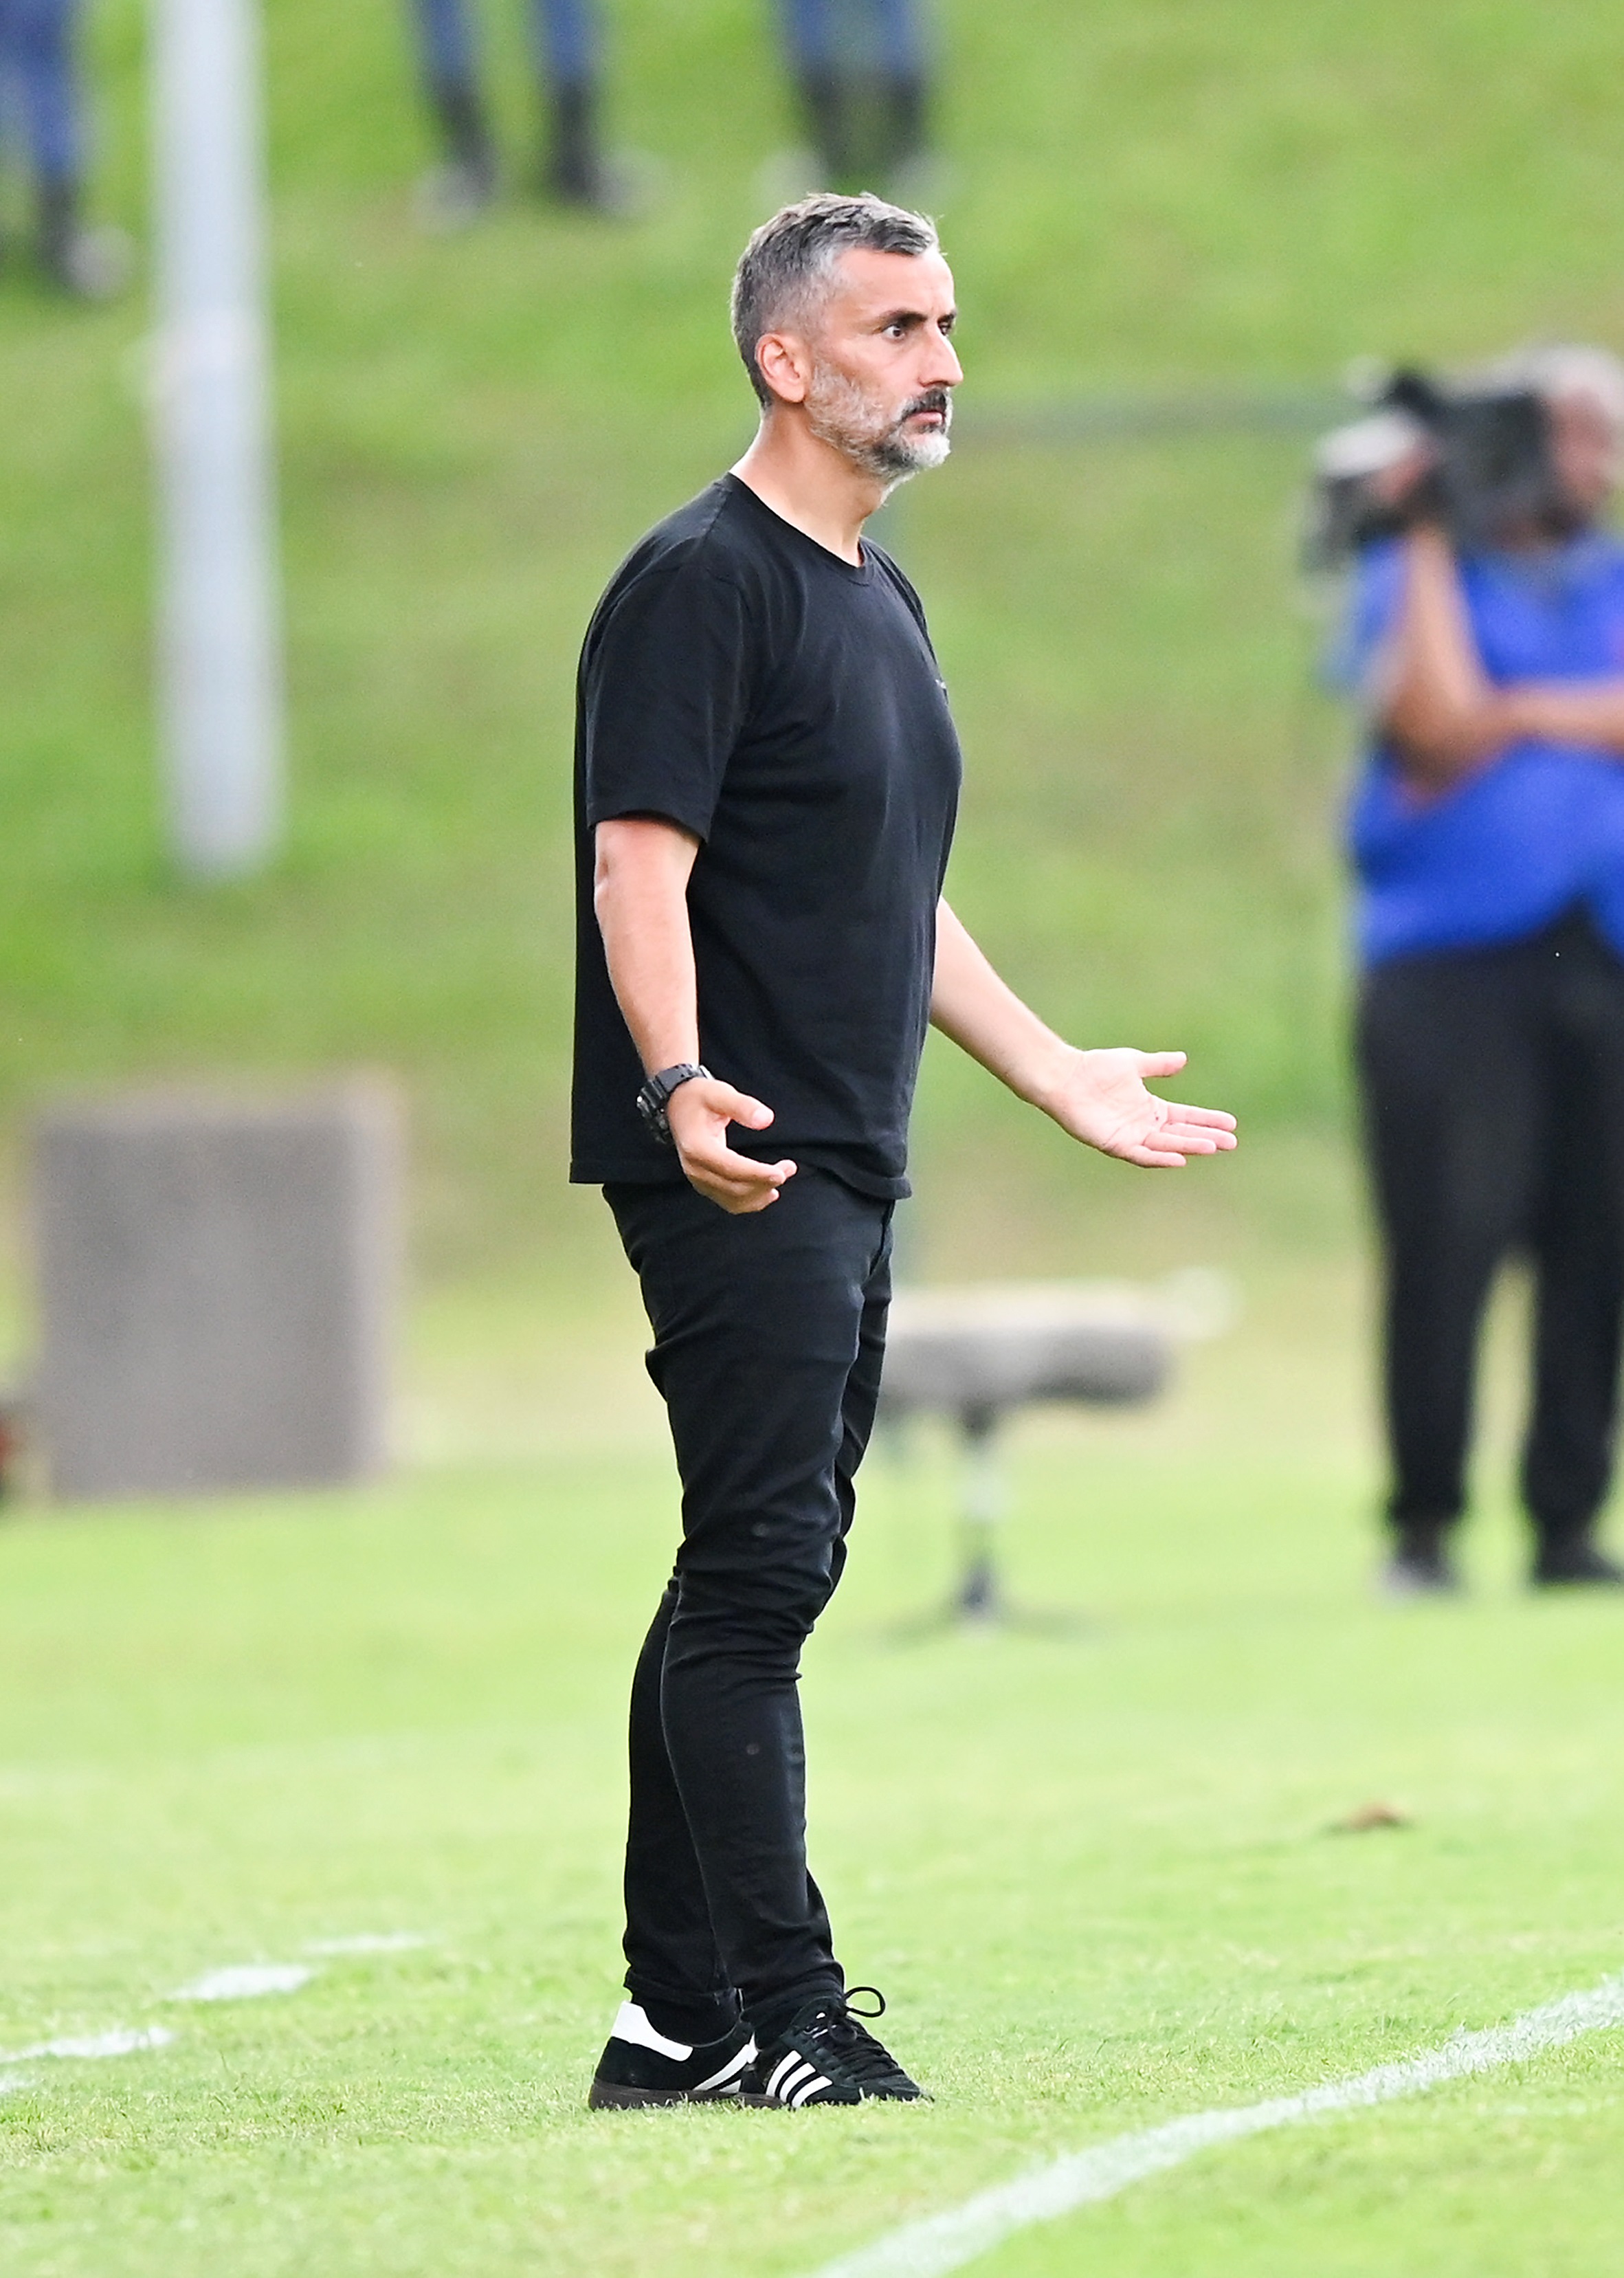 Insider: Pressure Mounting For Riveiro At Pirates